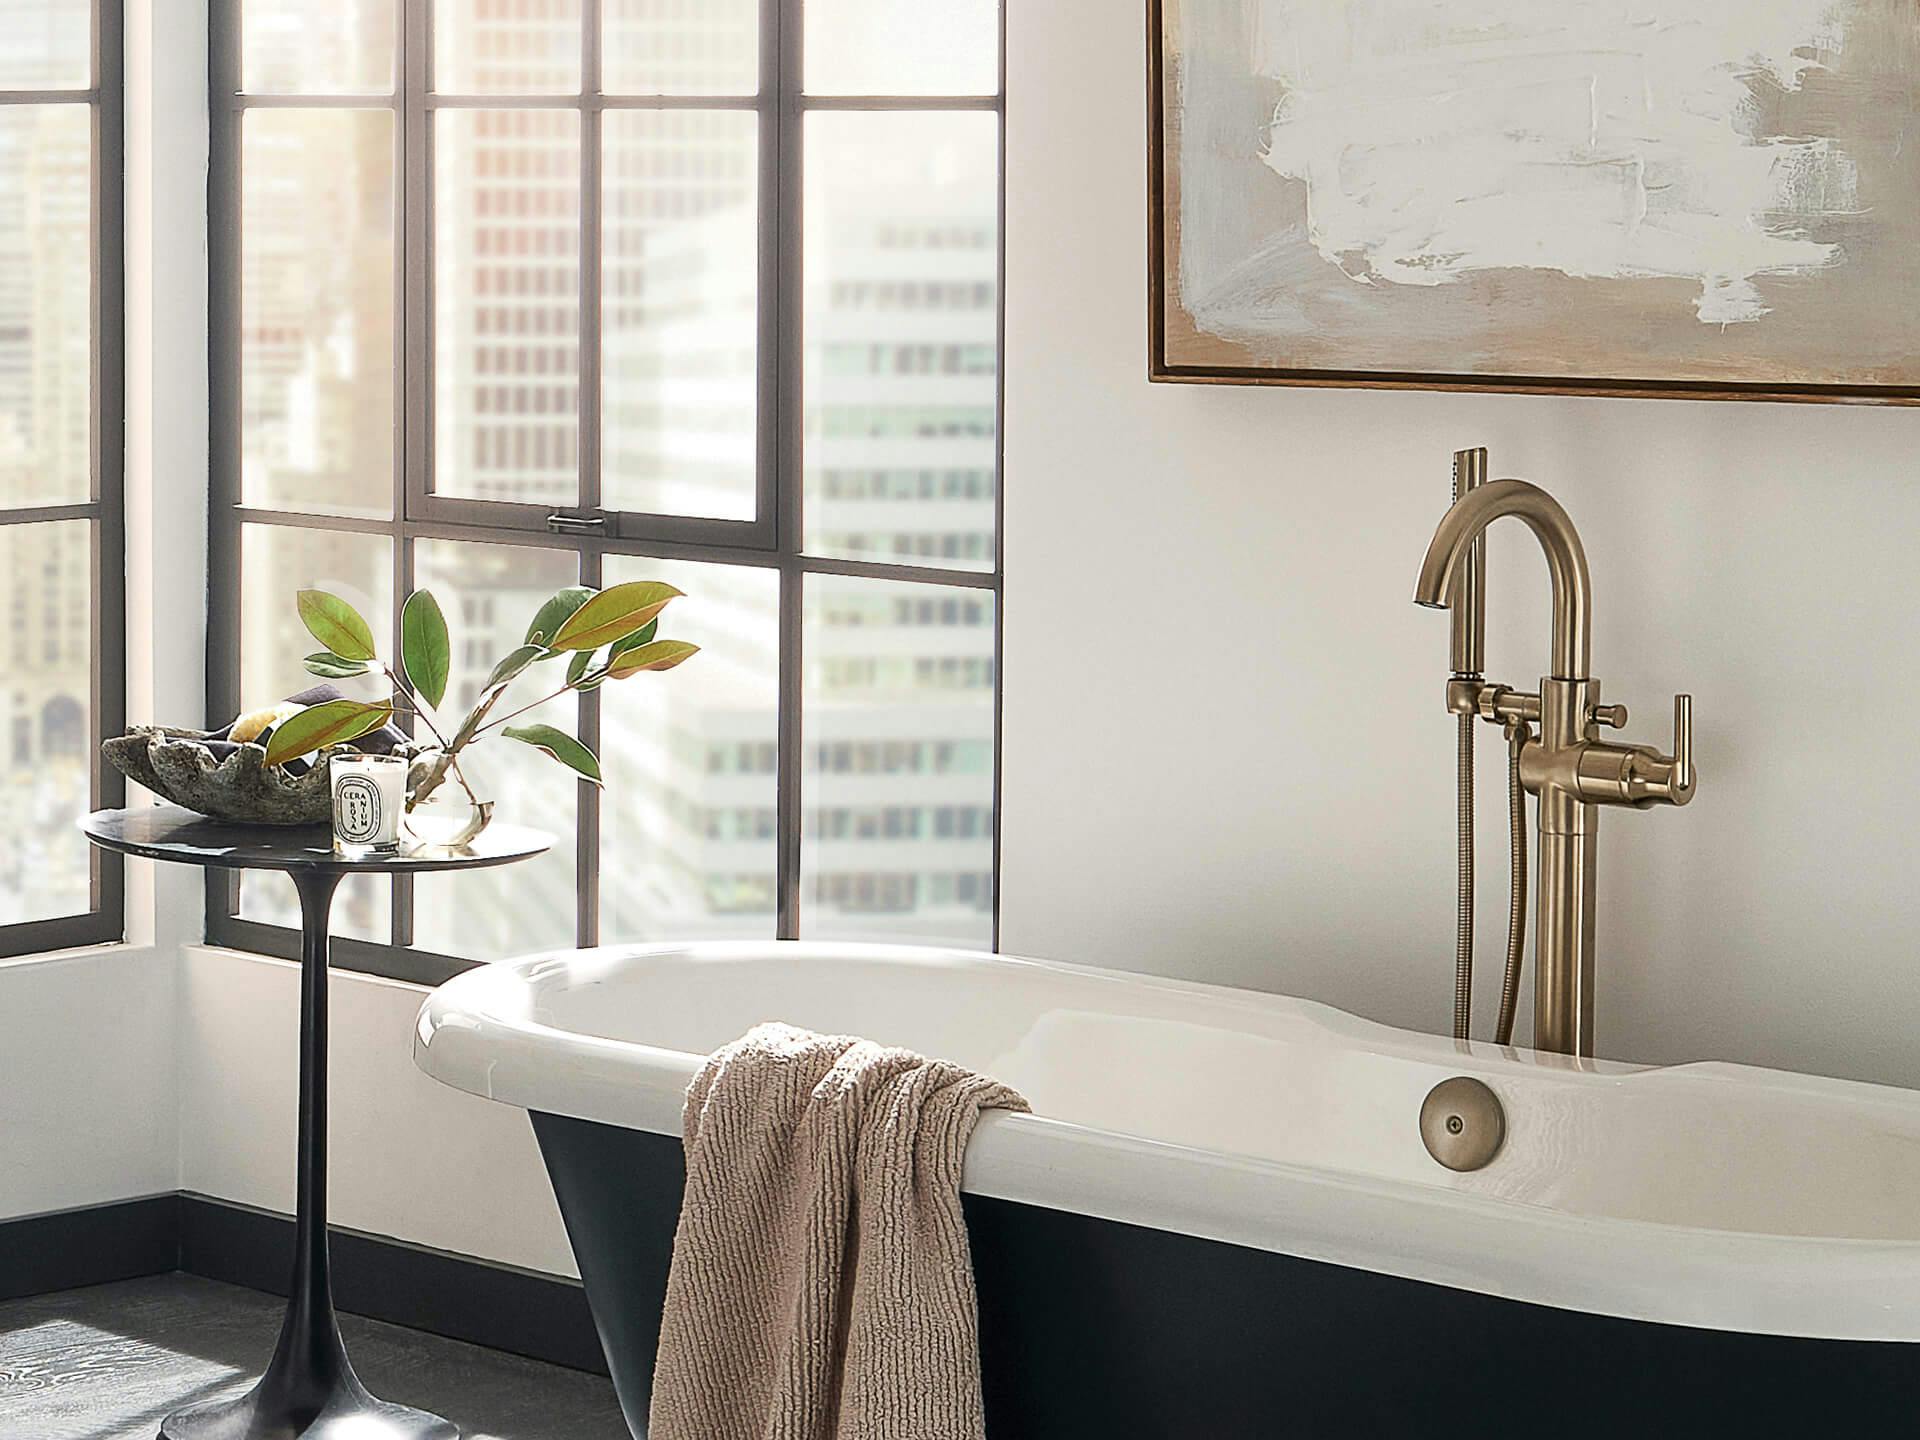 Bathroom at daytime featuring a widow-side bathtub with a Delta faucet in Champagne Bronze